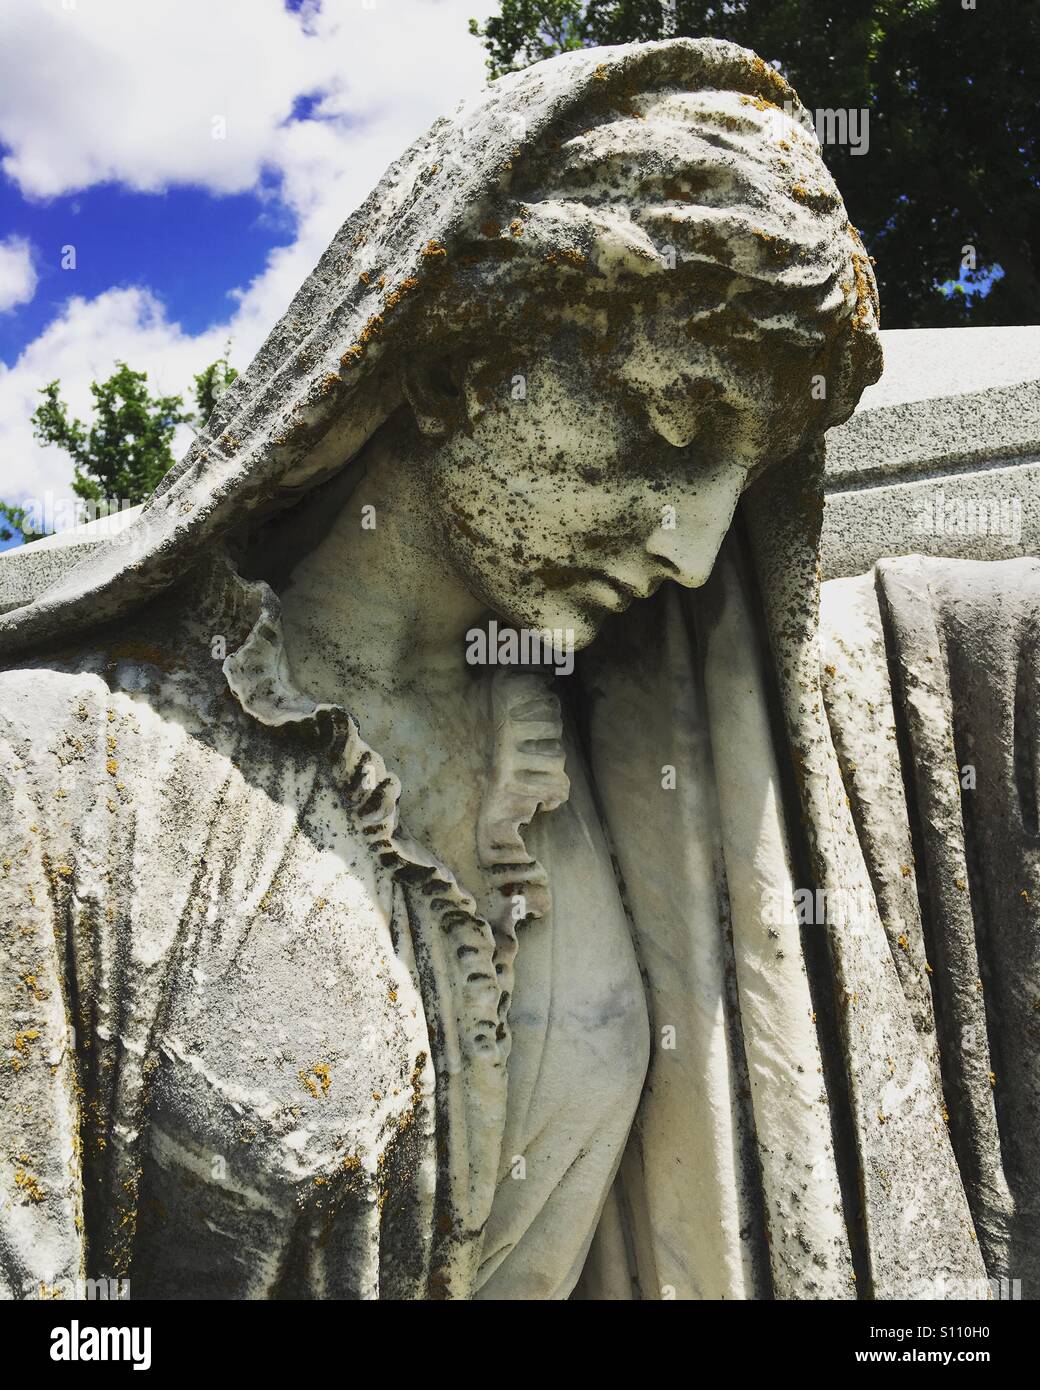 Weeping angel in Sidney Ohio cemetery Stock Photo